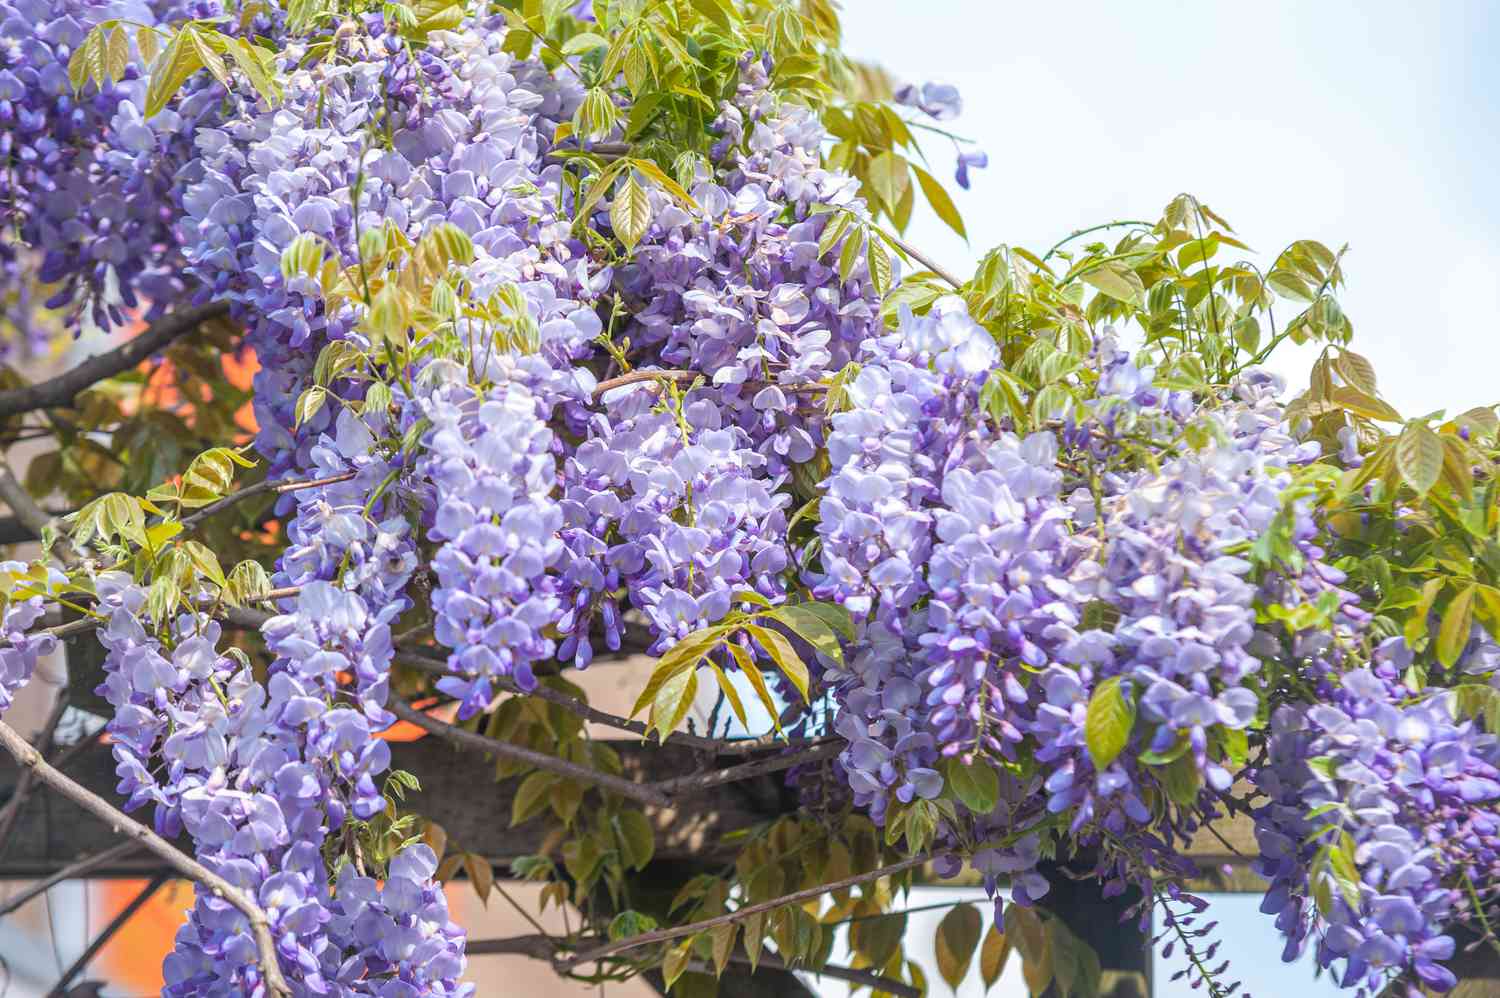 Chinese wisteria vines hanging over pergola with purple flowers